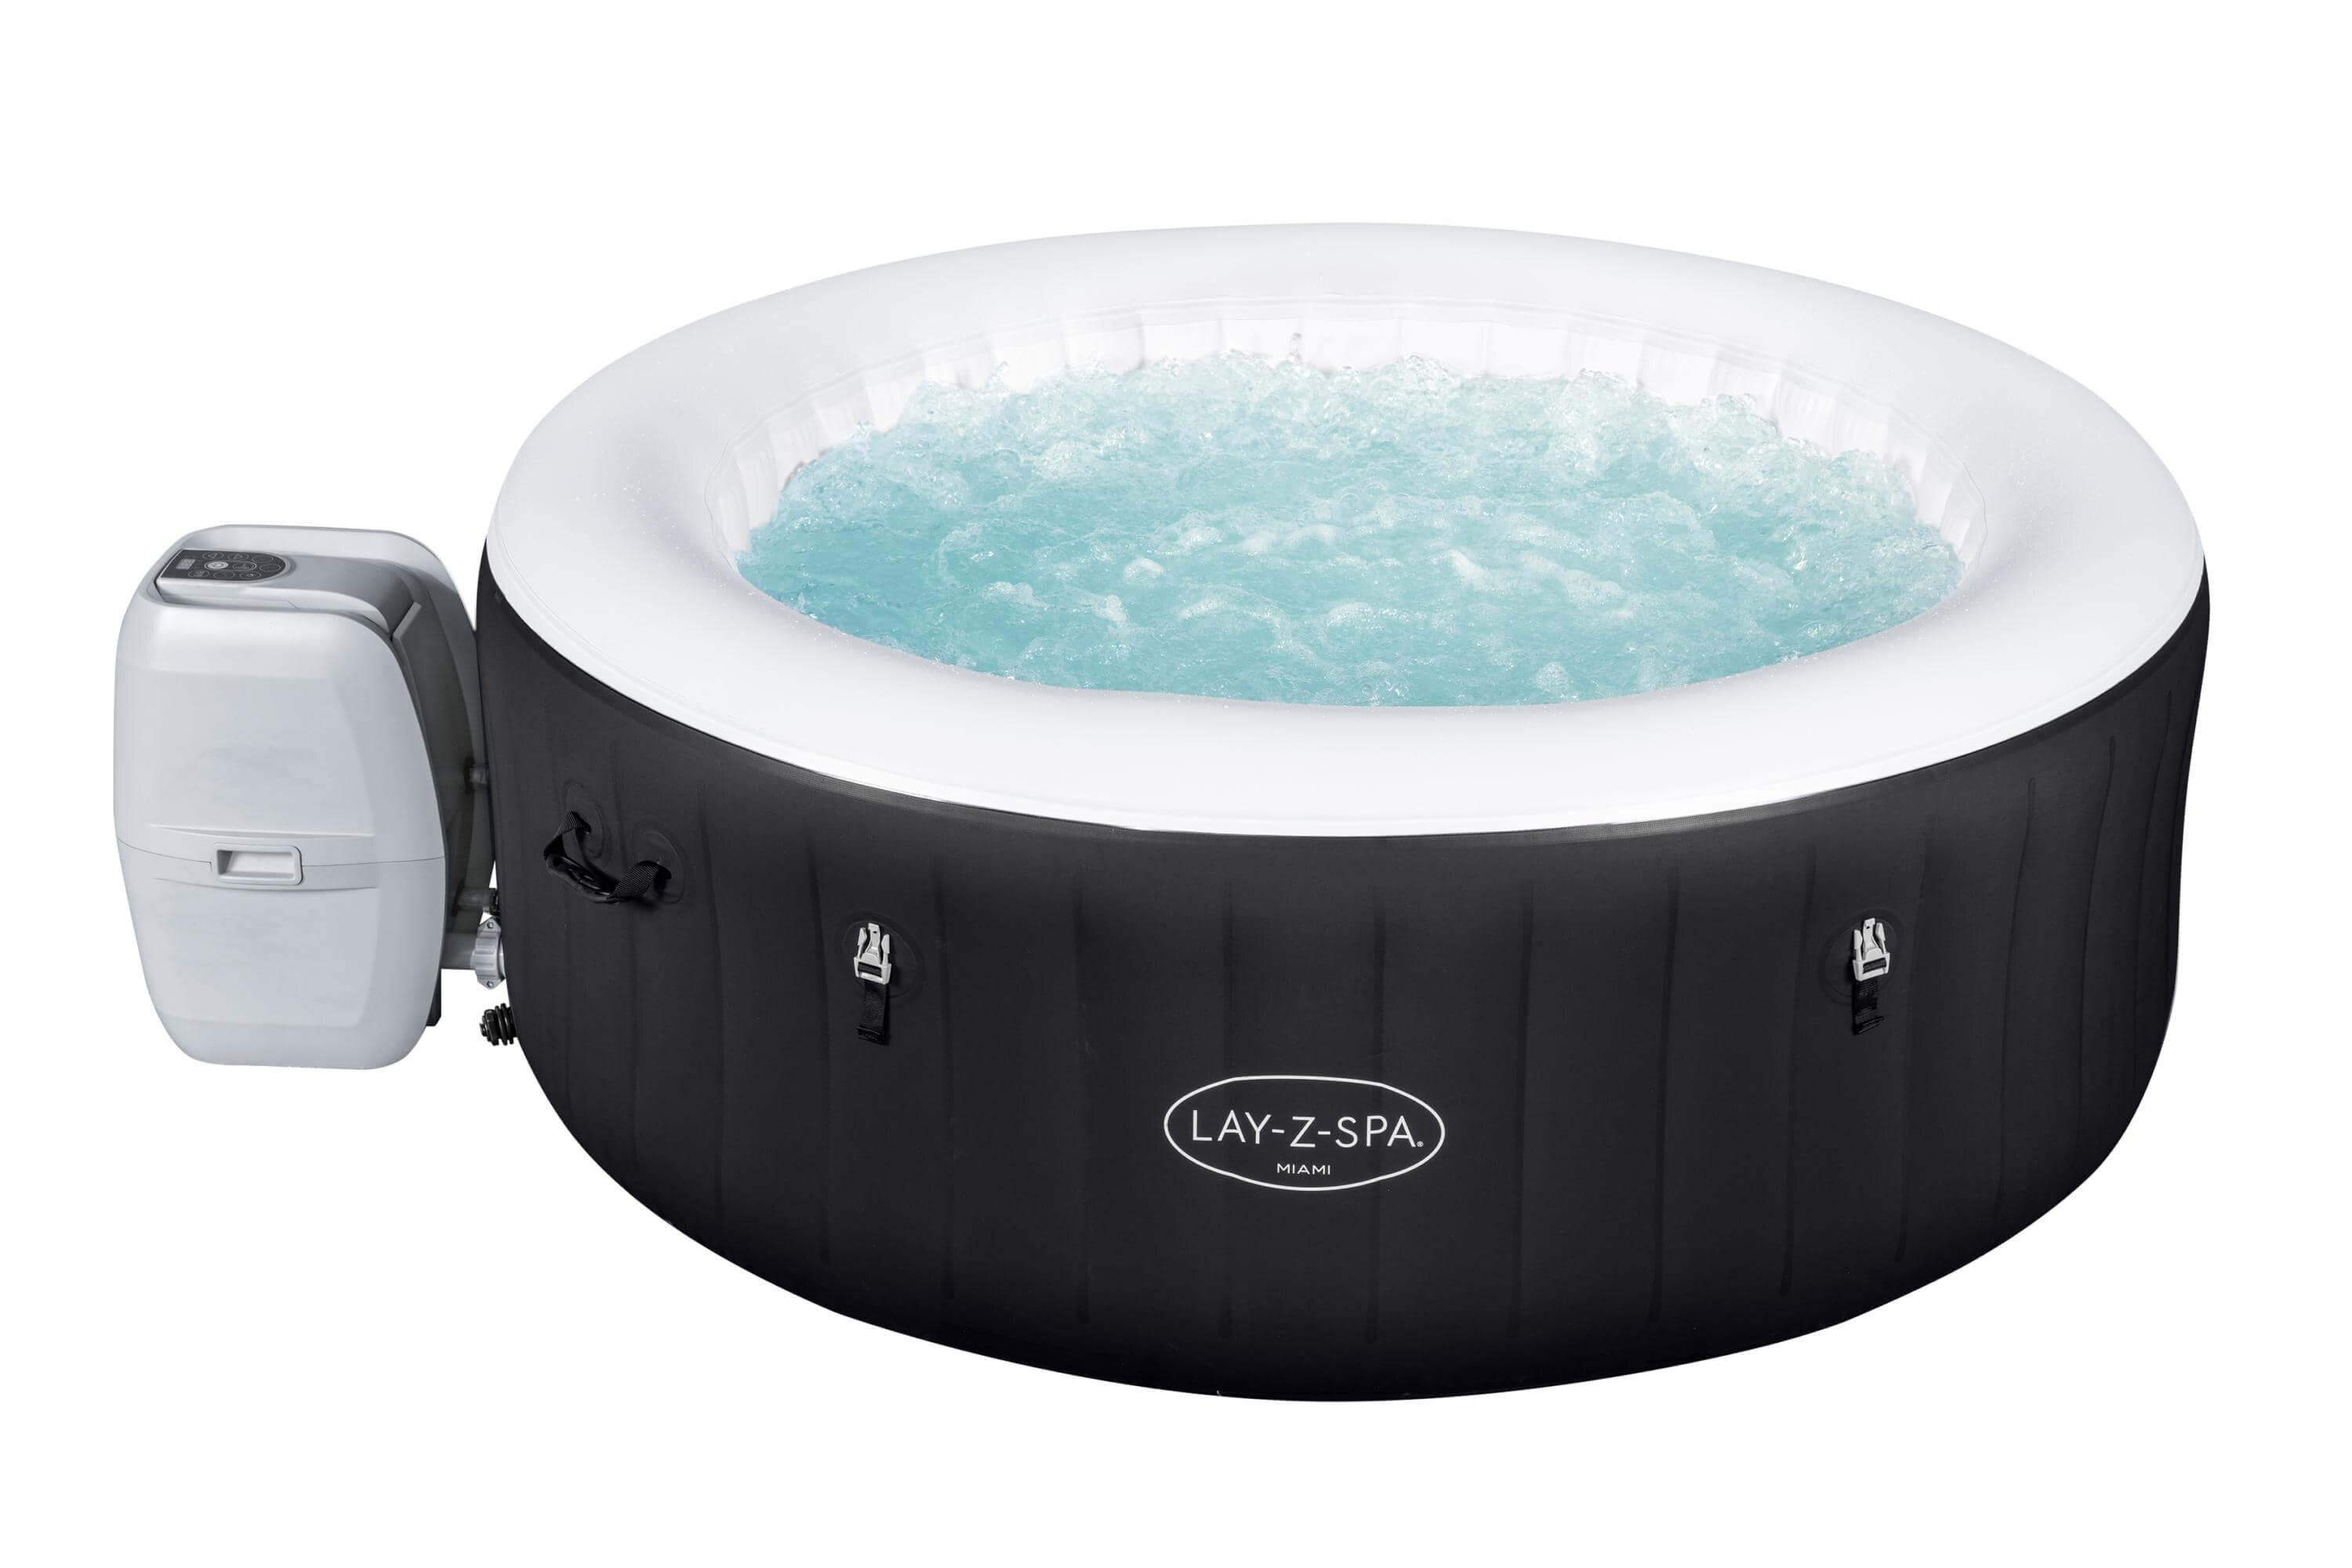  Lay  z  Spa  Rond Miami gonflable Bestway  2  4  personnes  